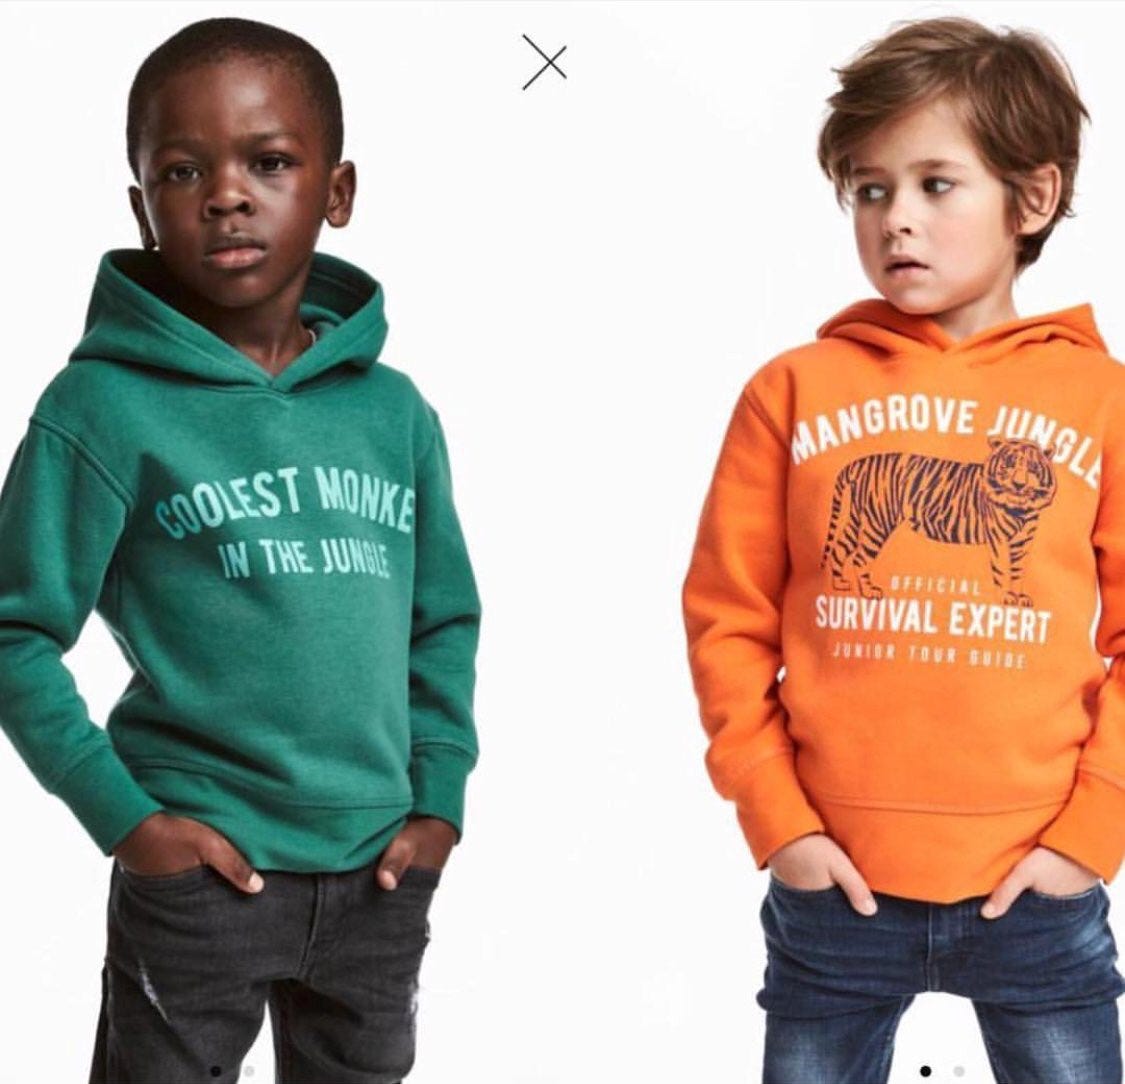 H&M Racial Ad: Intentional or Unintentional | by Godlymartins Olayemi |  Medium